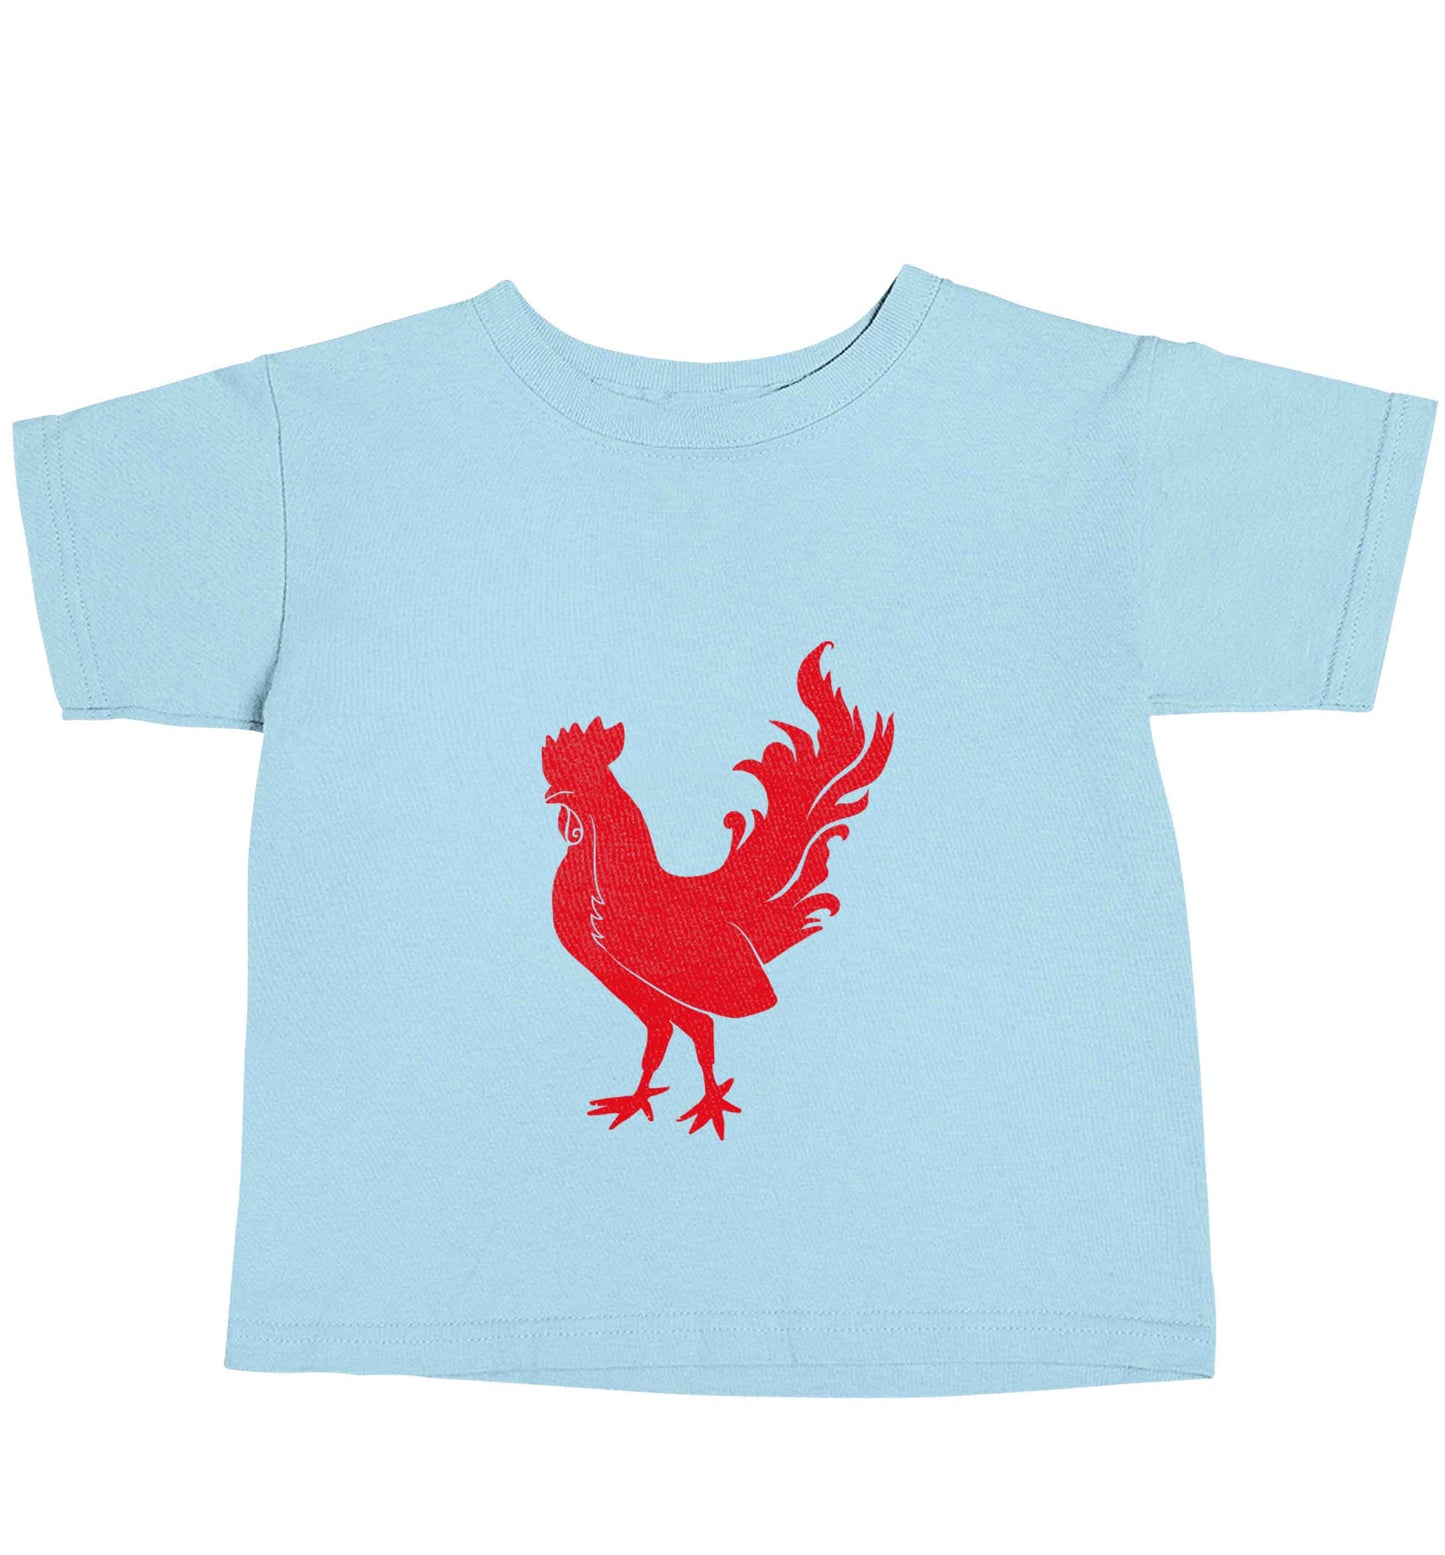 Rooster light blue baby toddler Tshirt 2 Years